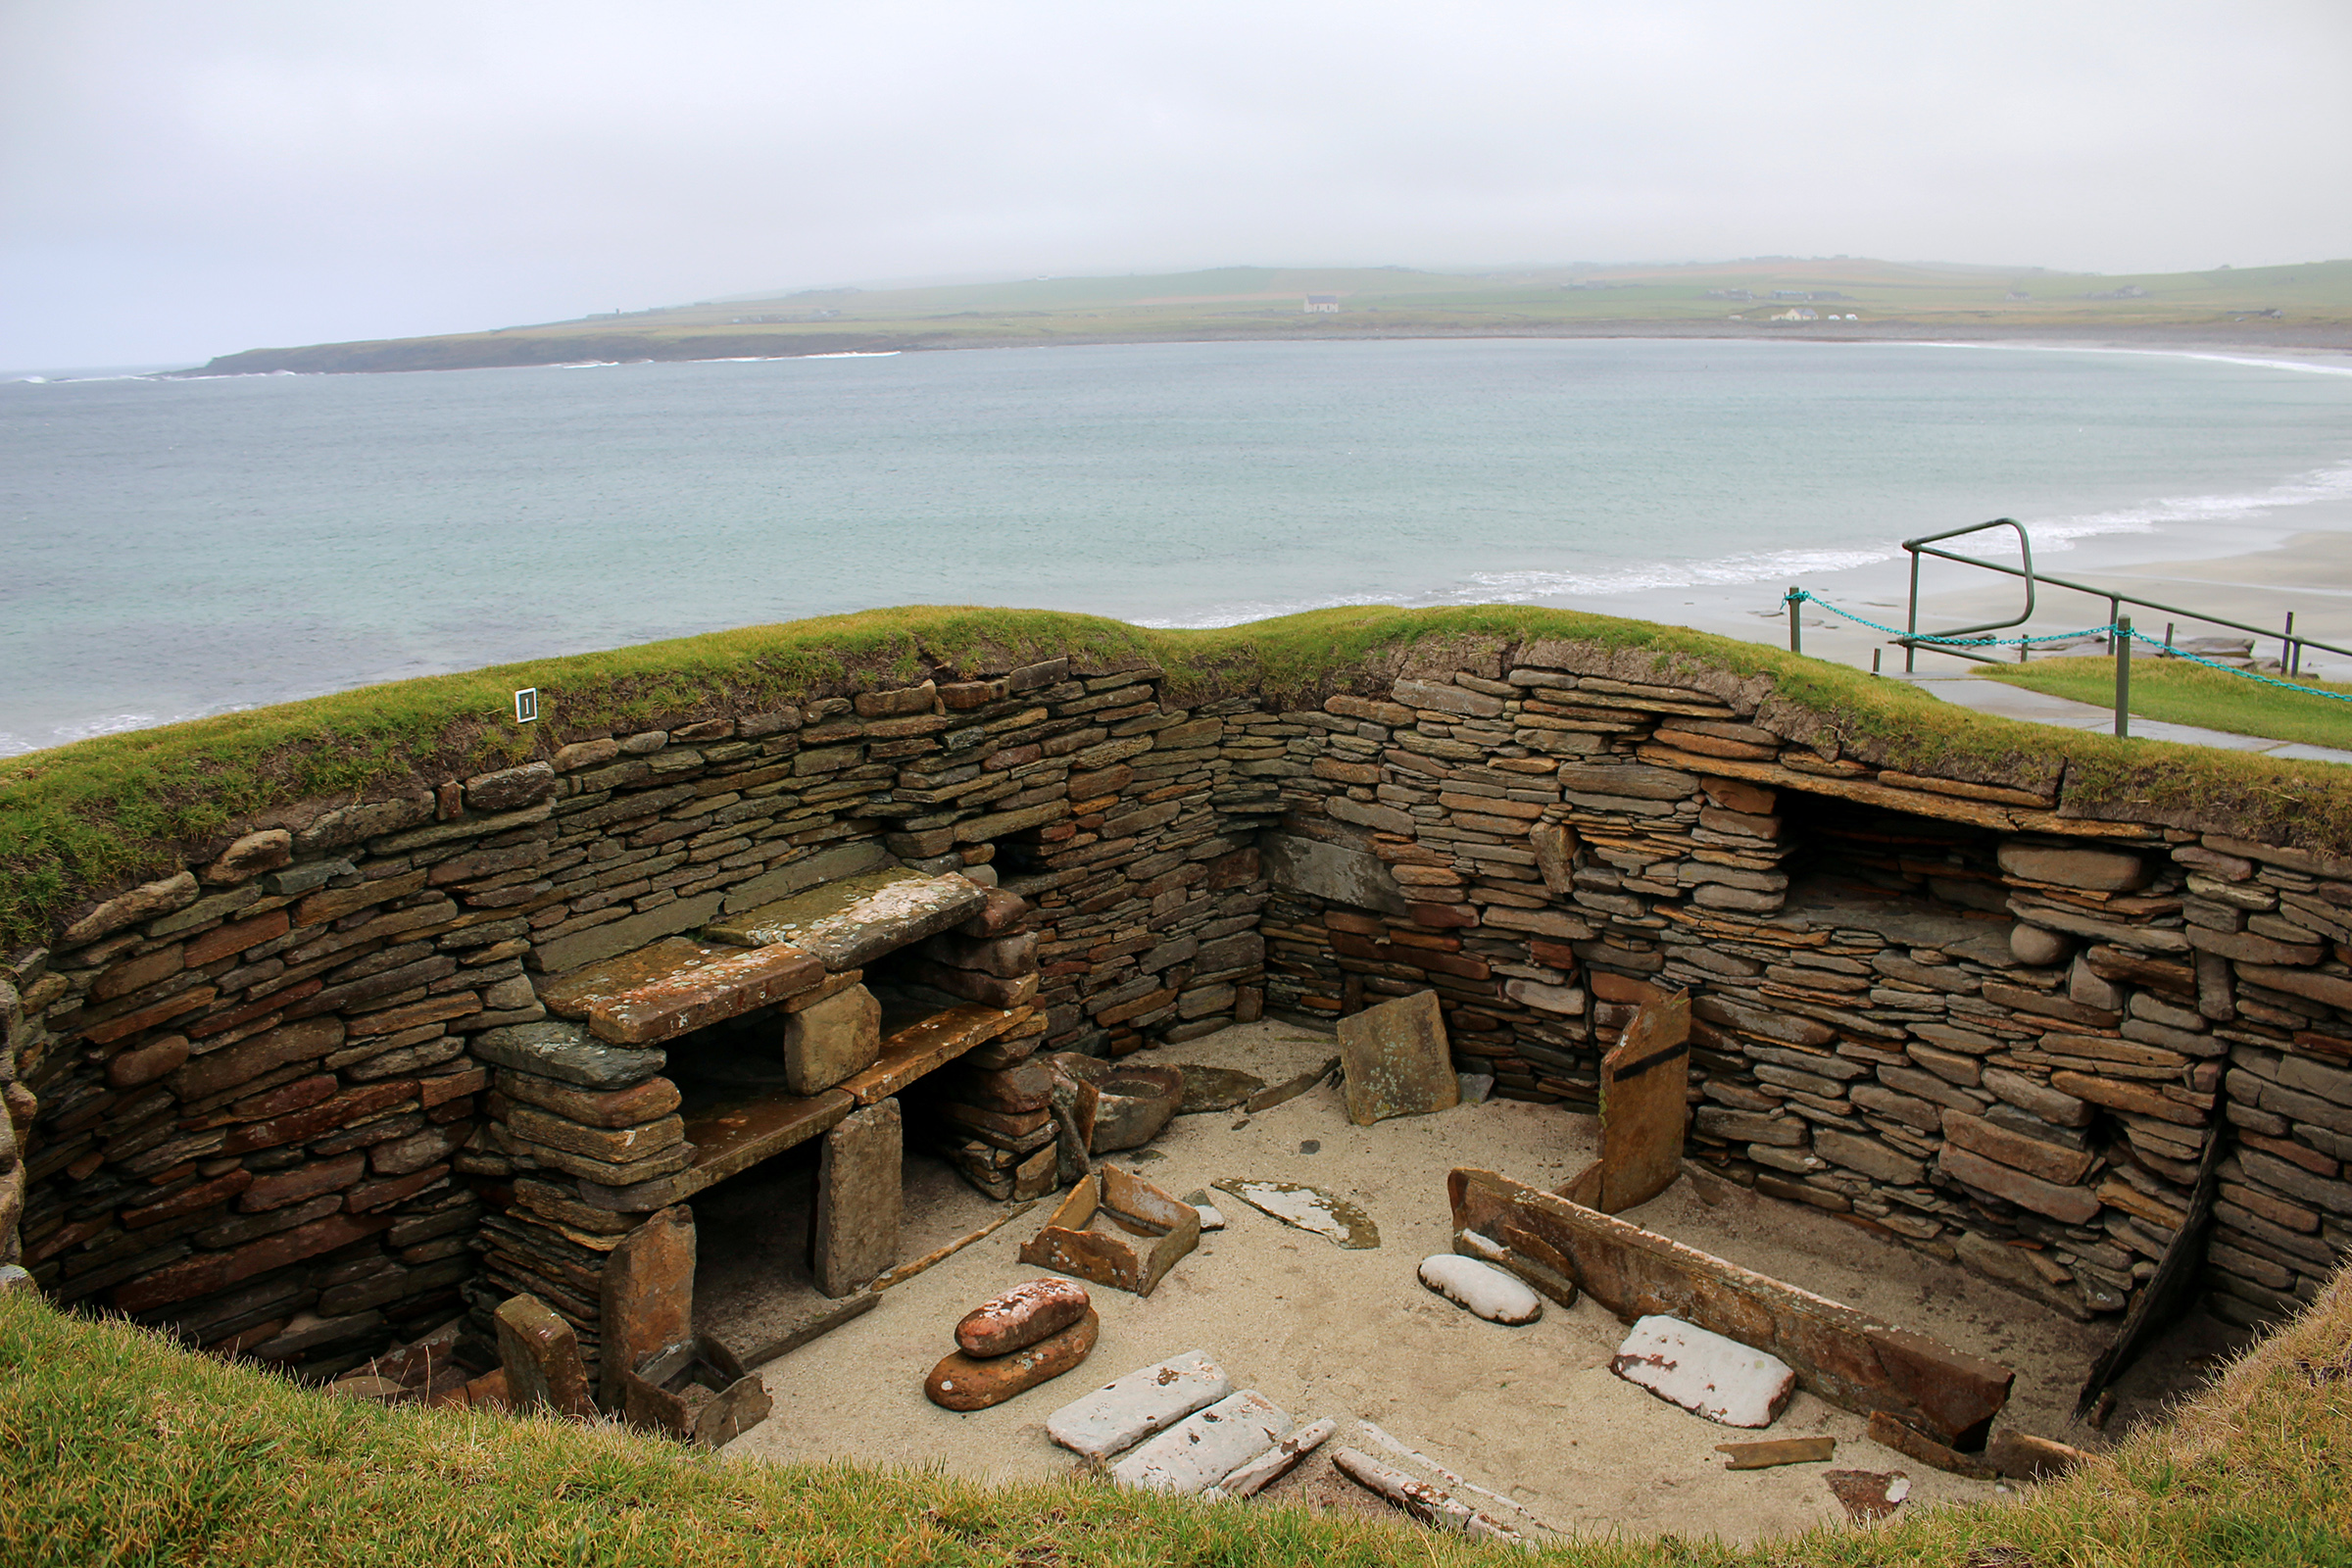 Neolithic Buildings are seen at Skara Brae in the Orkney Islands, Scotland